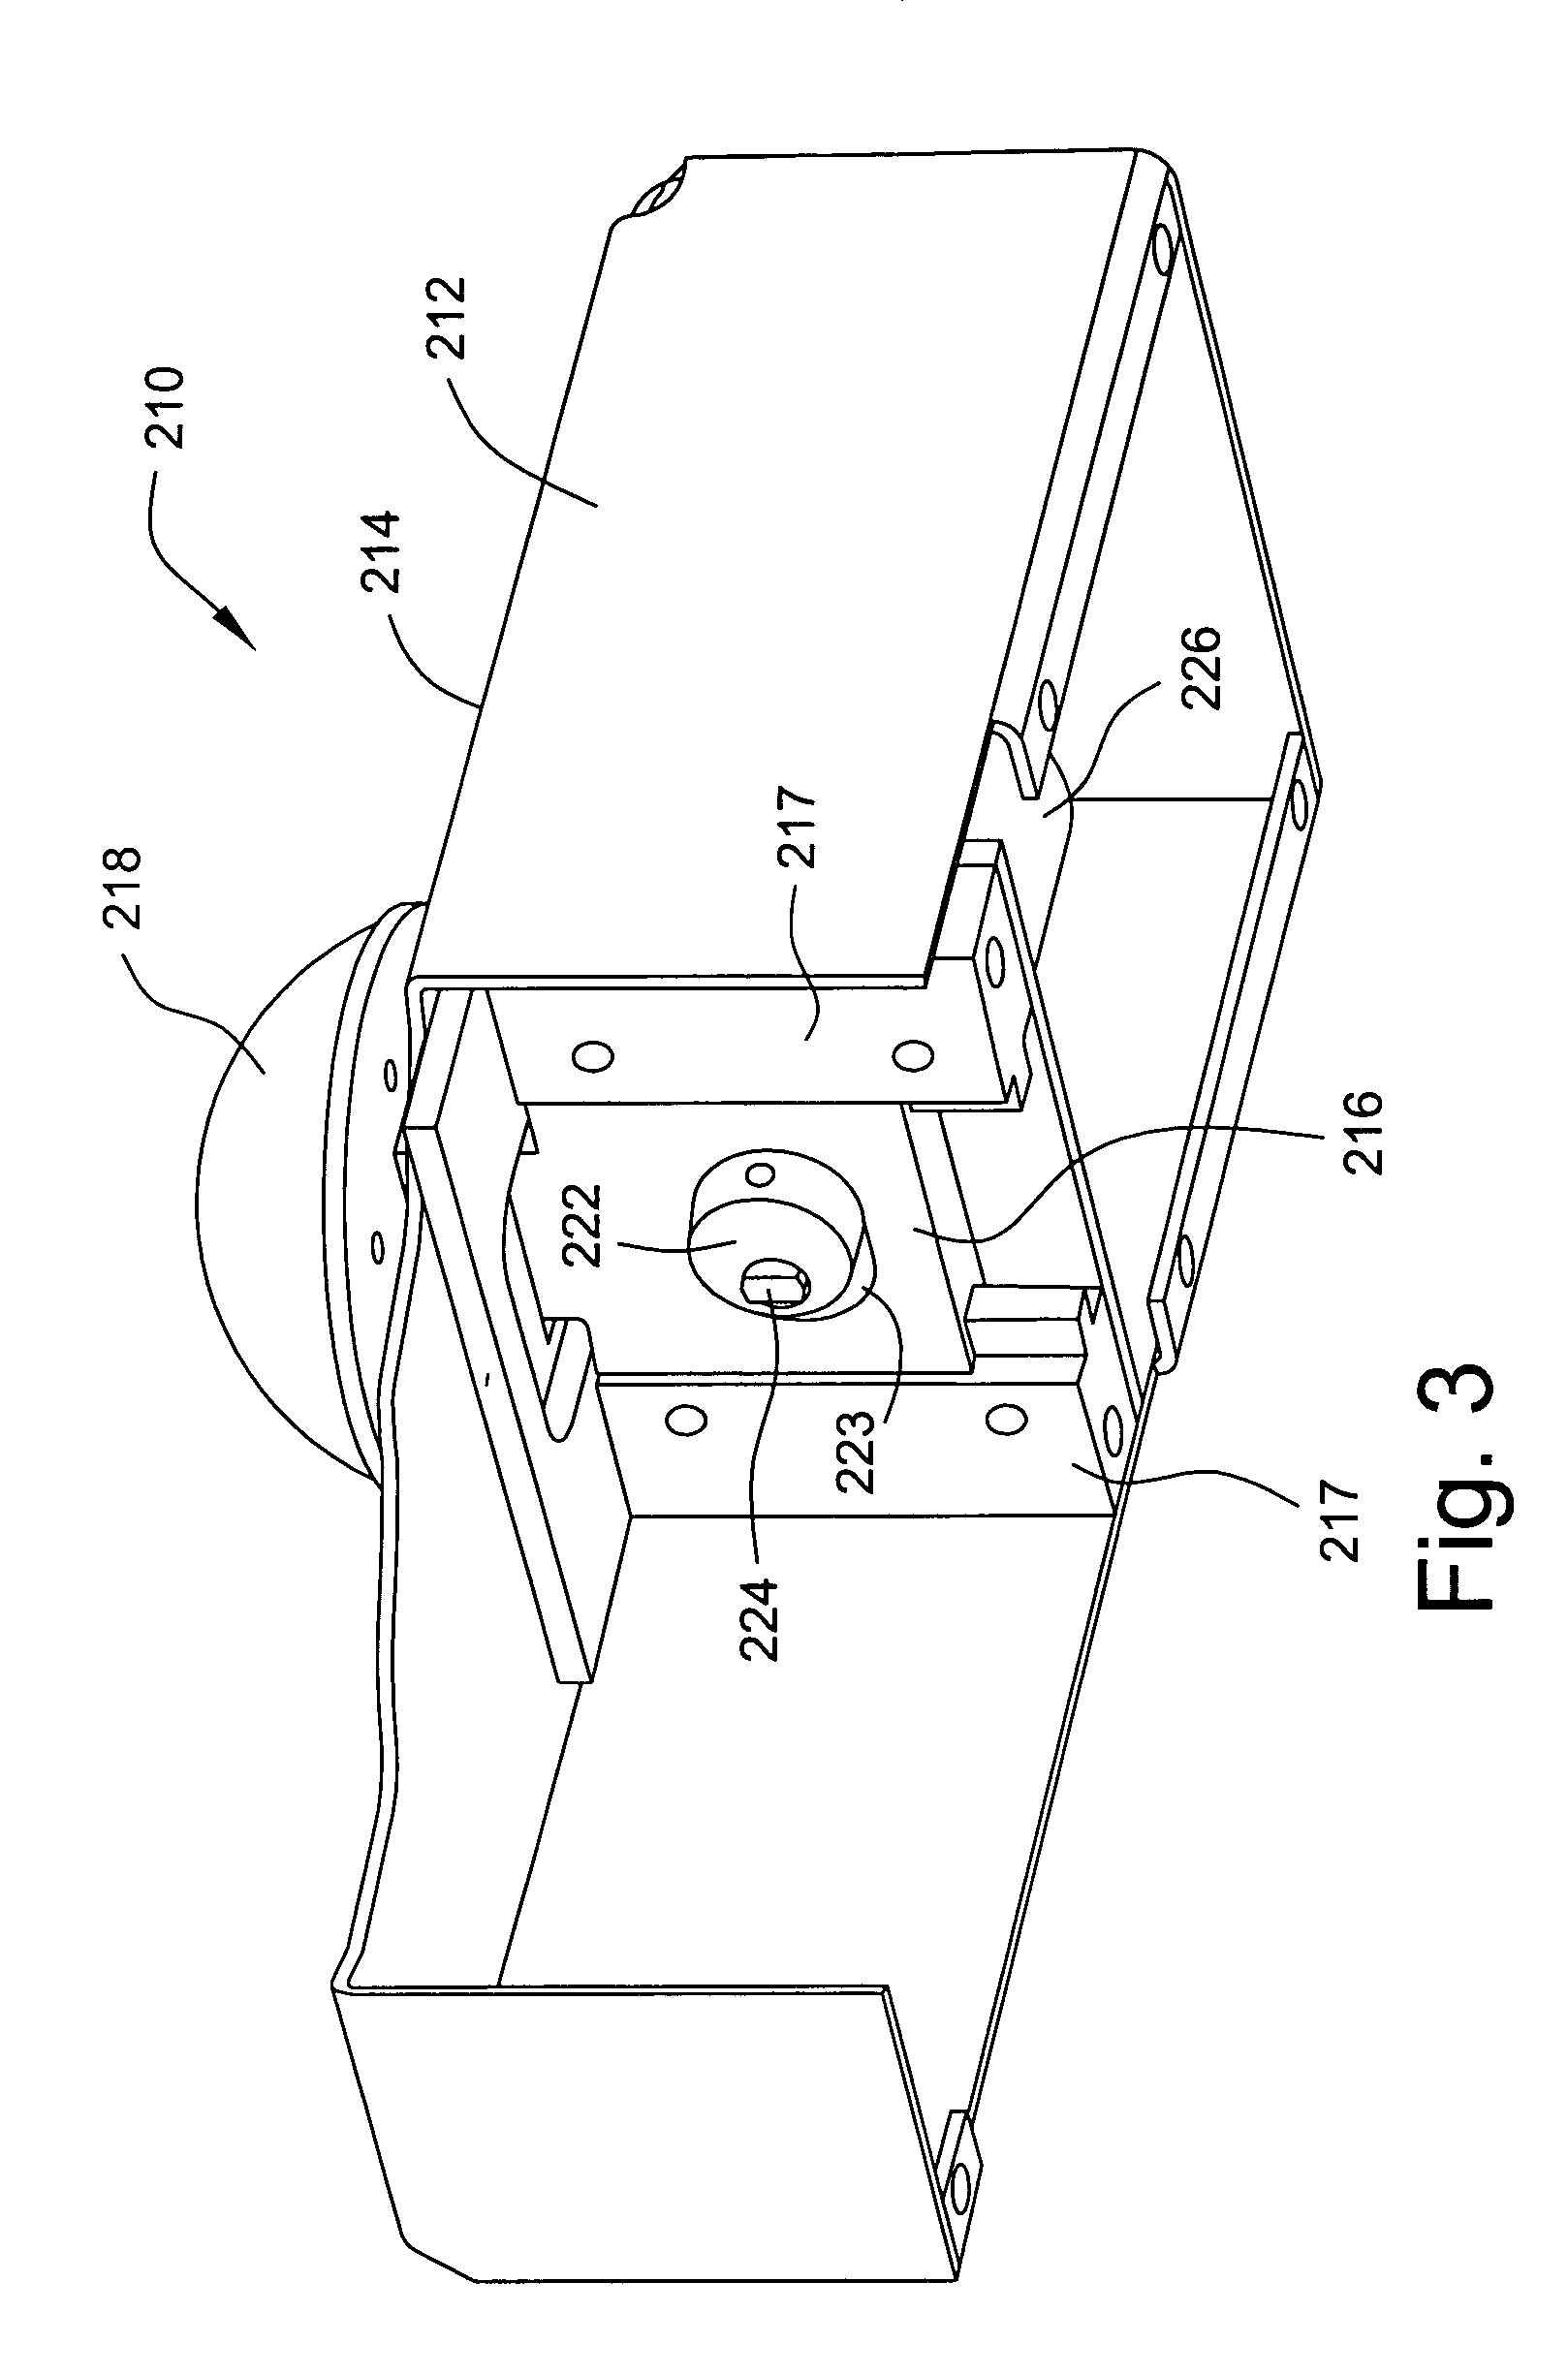 Apparatus and method for applying variable localized pressure to the human body